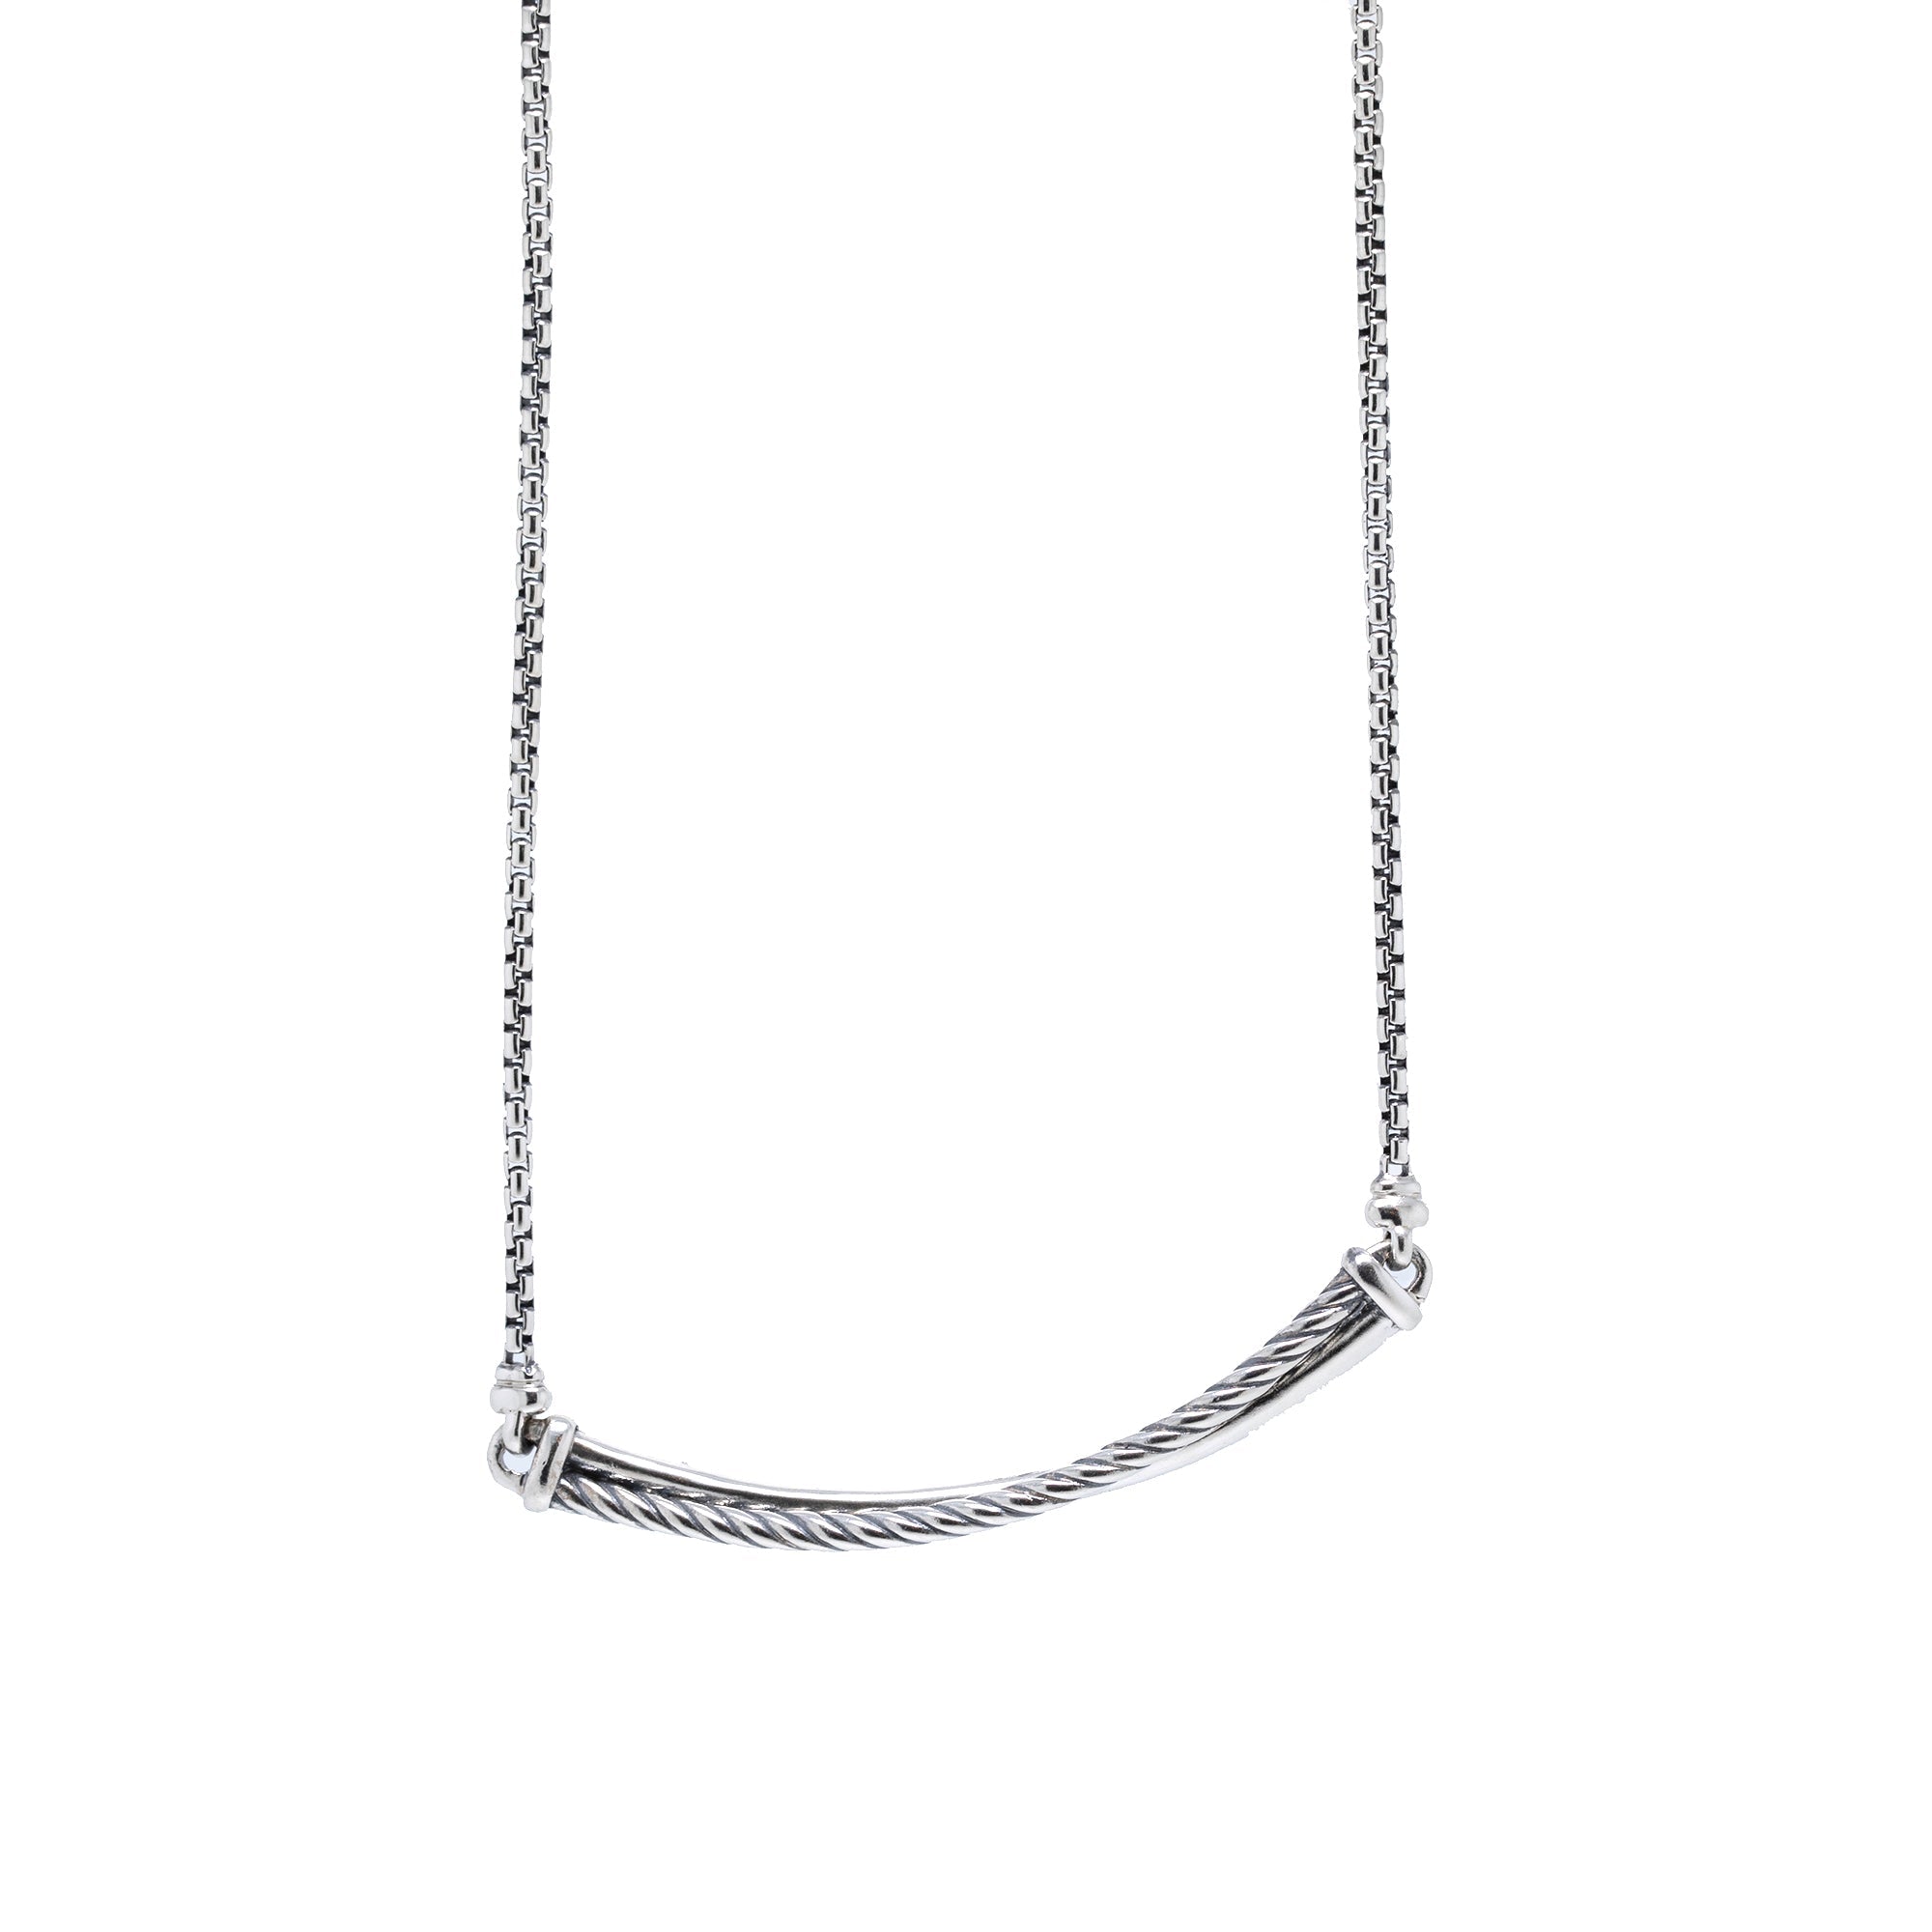 DY Madison Three Ring Chain Necklace in Sterling Silver, 3mm | David Yurman